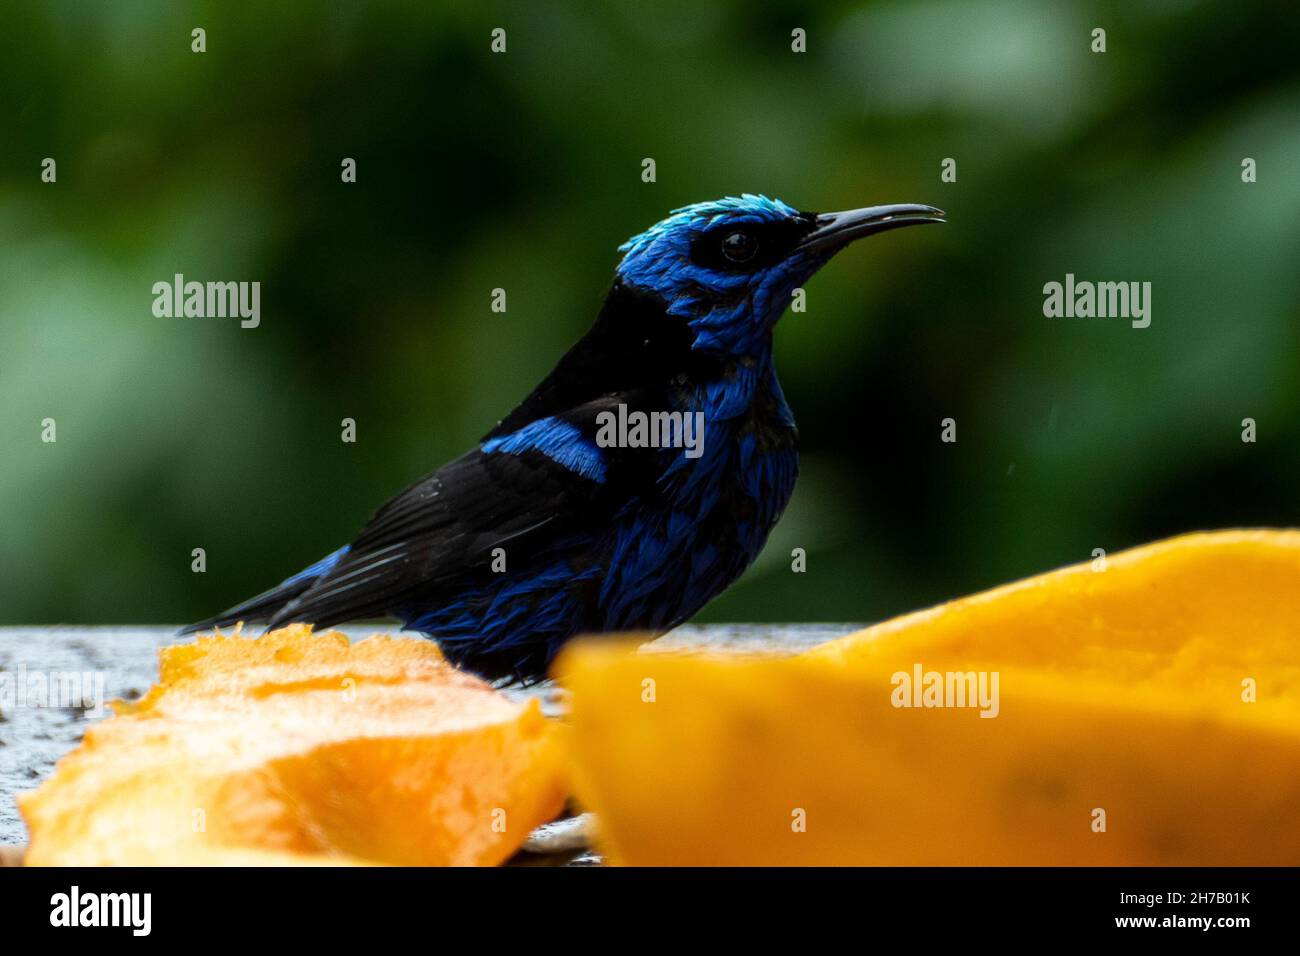 The red-legged honeycreeper (Cyanerpes cyaneus) is a small songbird species in the tanager family (Thraupidae). It is found in Atlantic Forest, Brazil Stock Photo